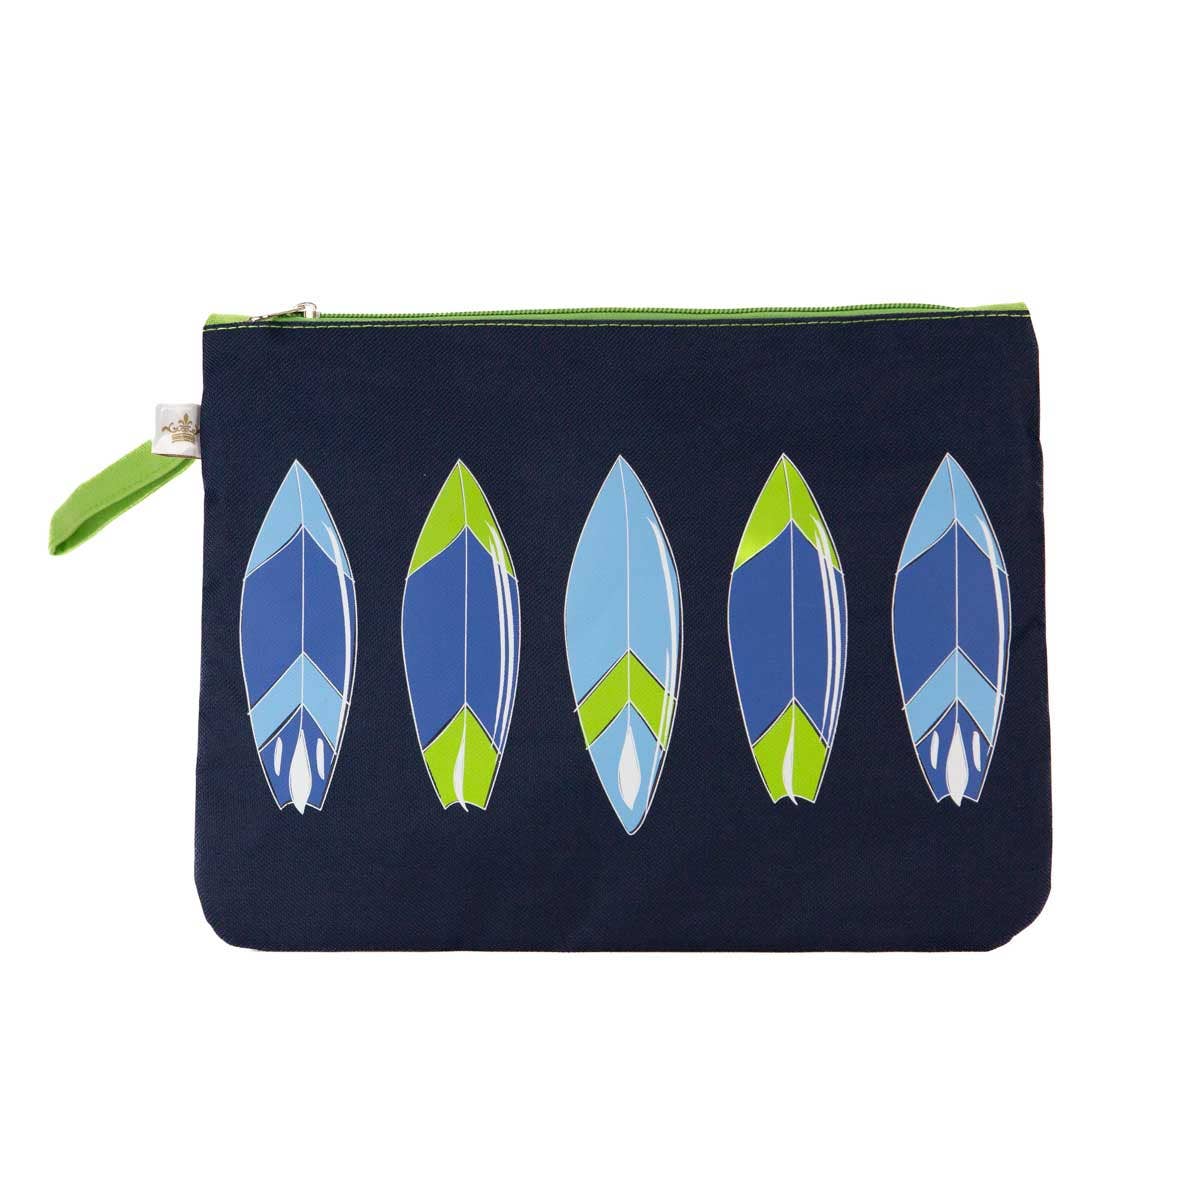 Wet/Dry Bag Wipeout Navy/Blue/Lime by The Royal Standard